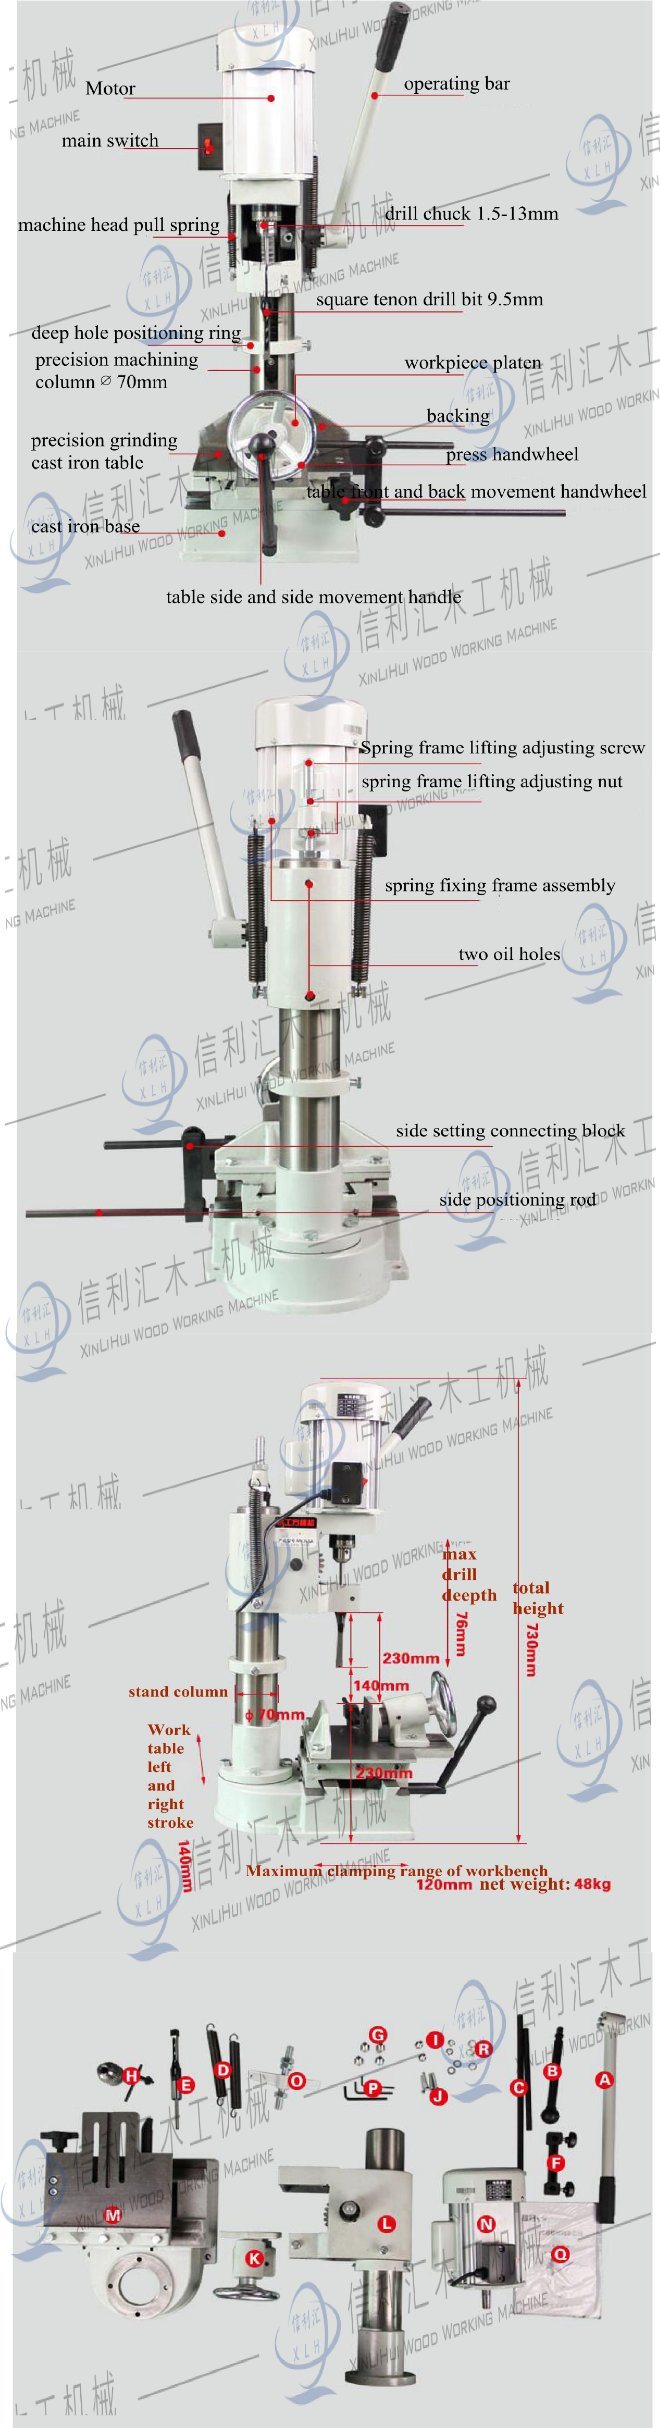 Vertical Single-Axis High-Speed Grooving Machine Manual Drilling Machine Square Drilling Machine with Pneumatic Pressure